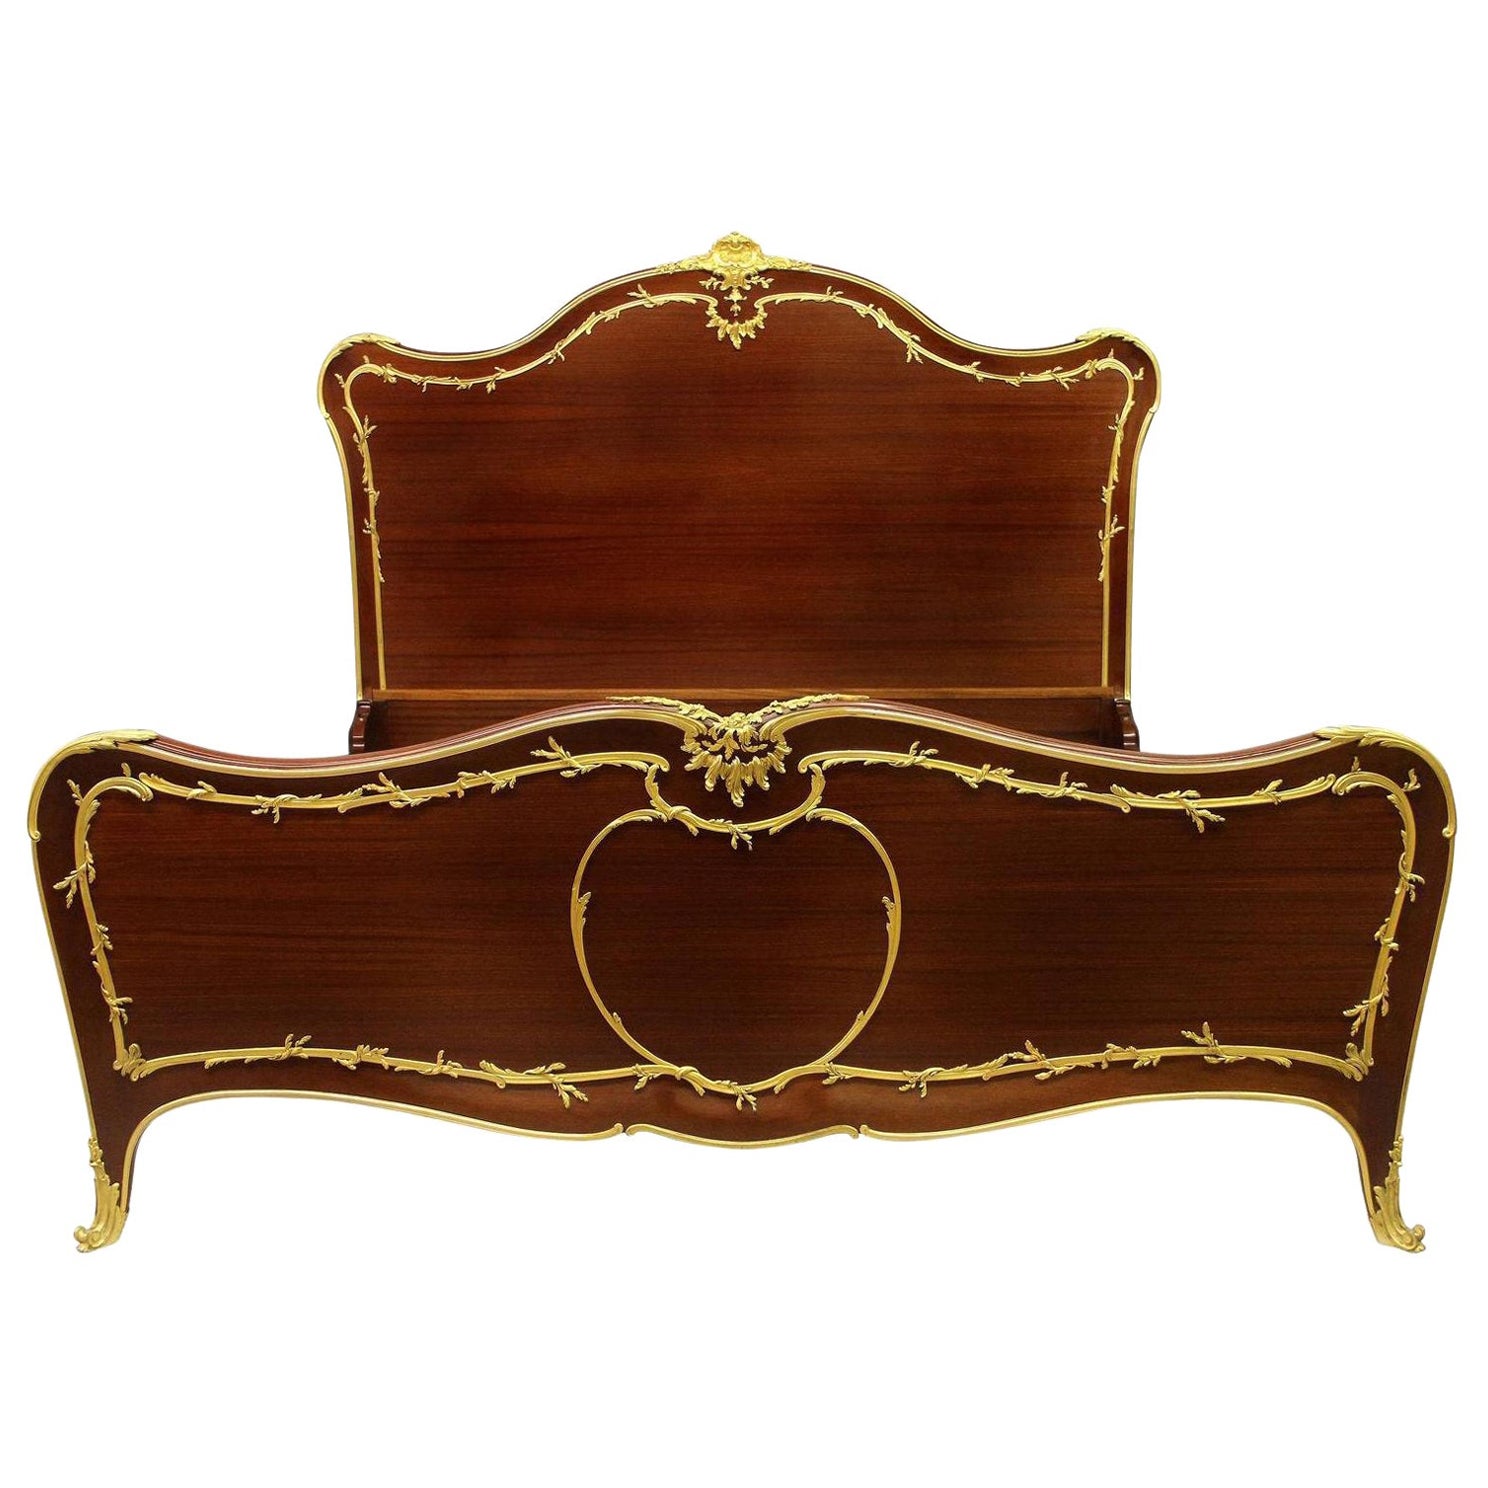 Early 20th Century Gilt Bronze-Mounted Mahogany King Size Bed by François Linke For Sale